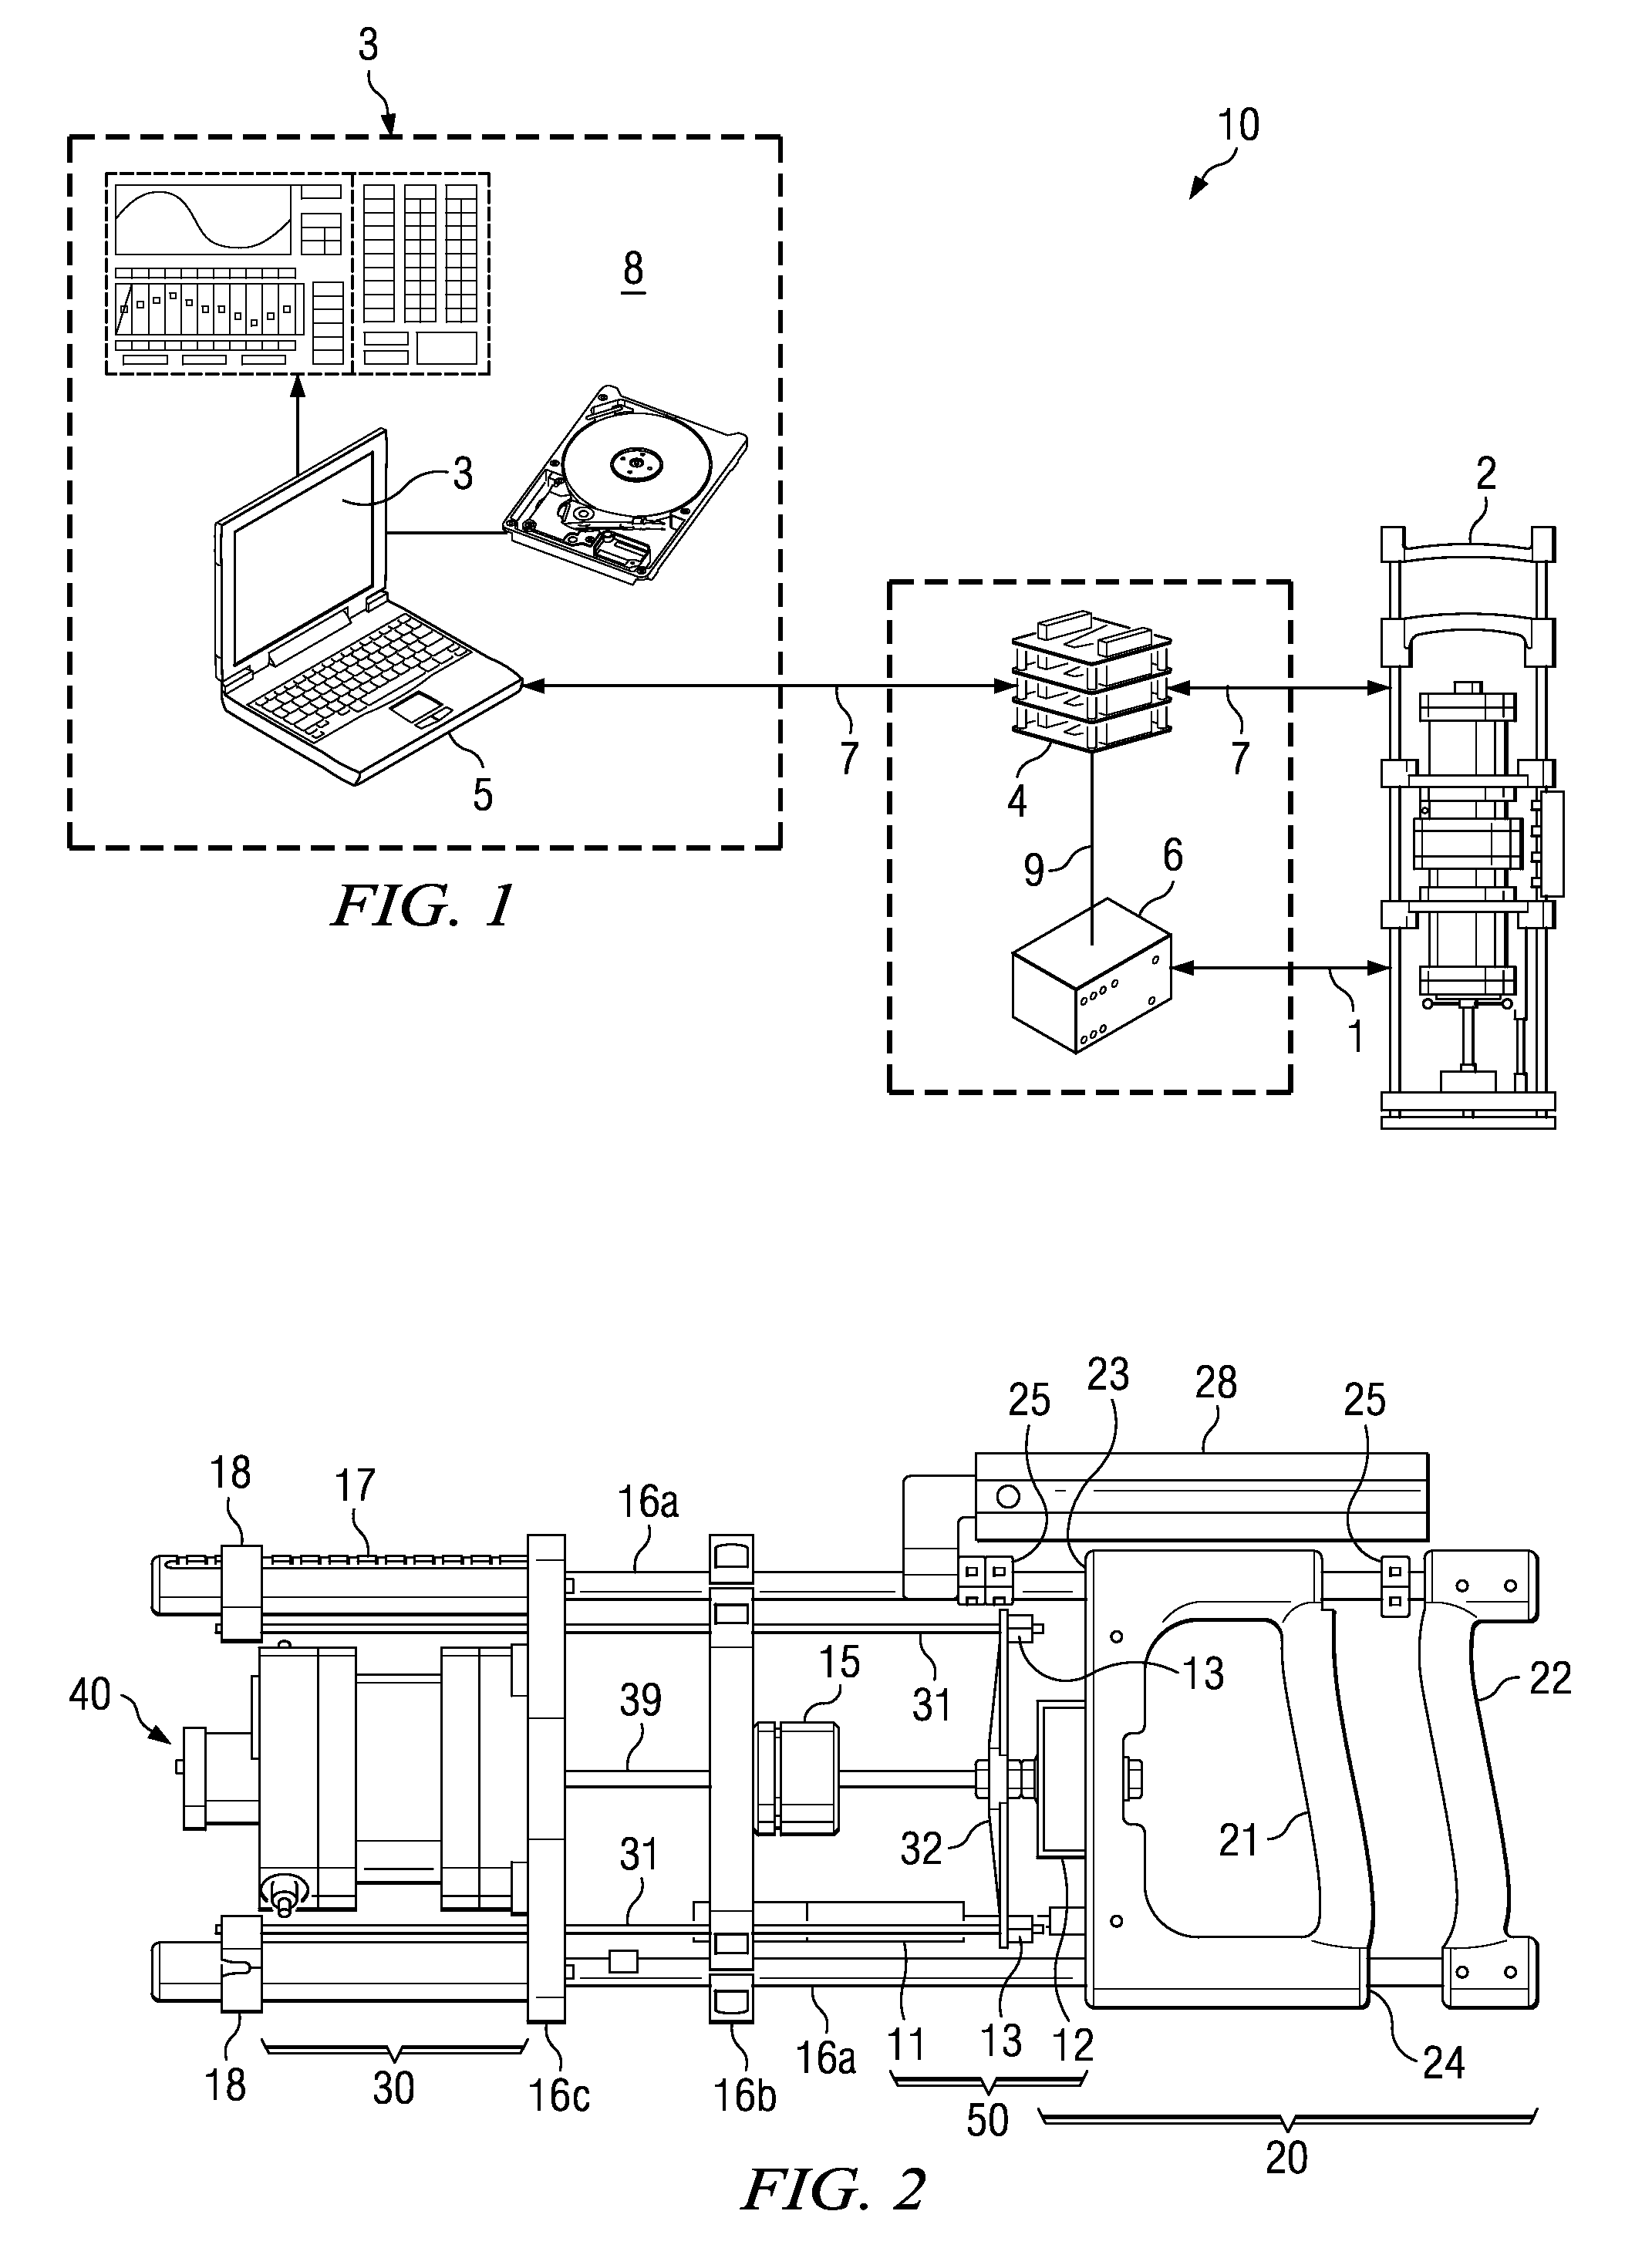 Variable resistance hand rehabilitation device with linear smart fluid damper and dynometer capabilities